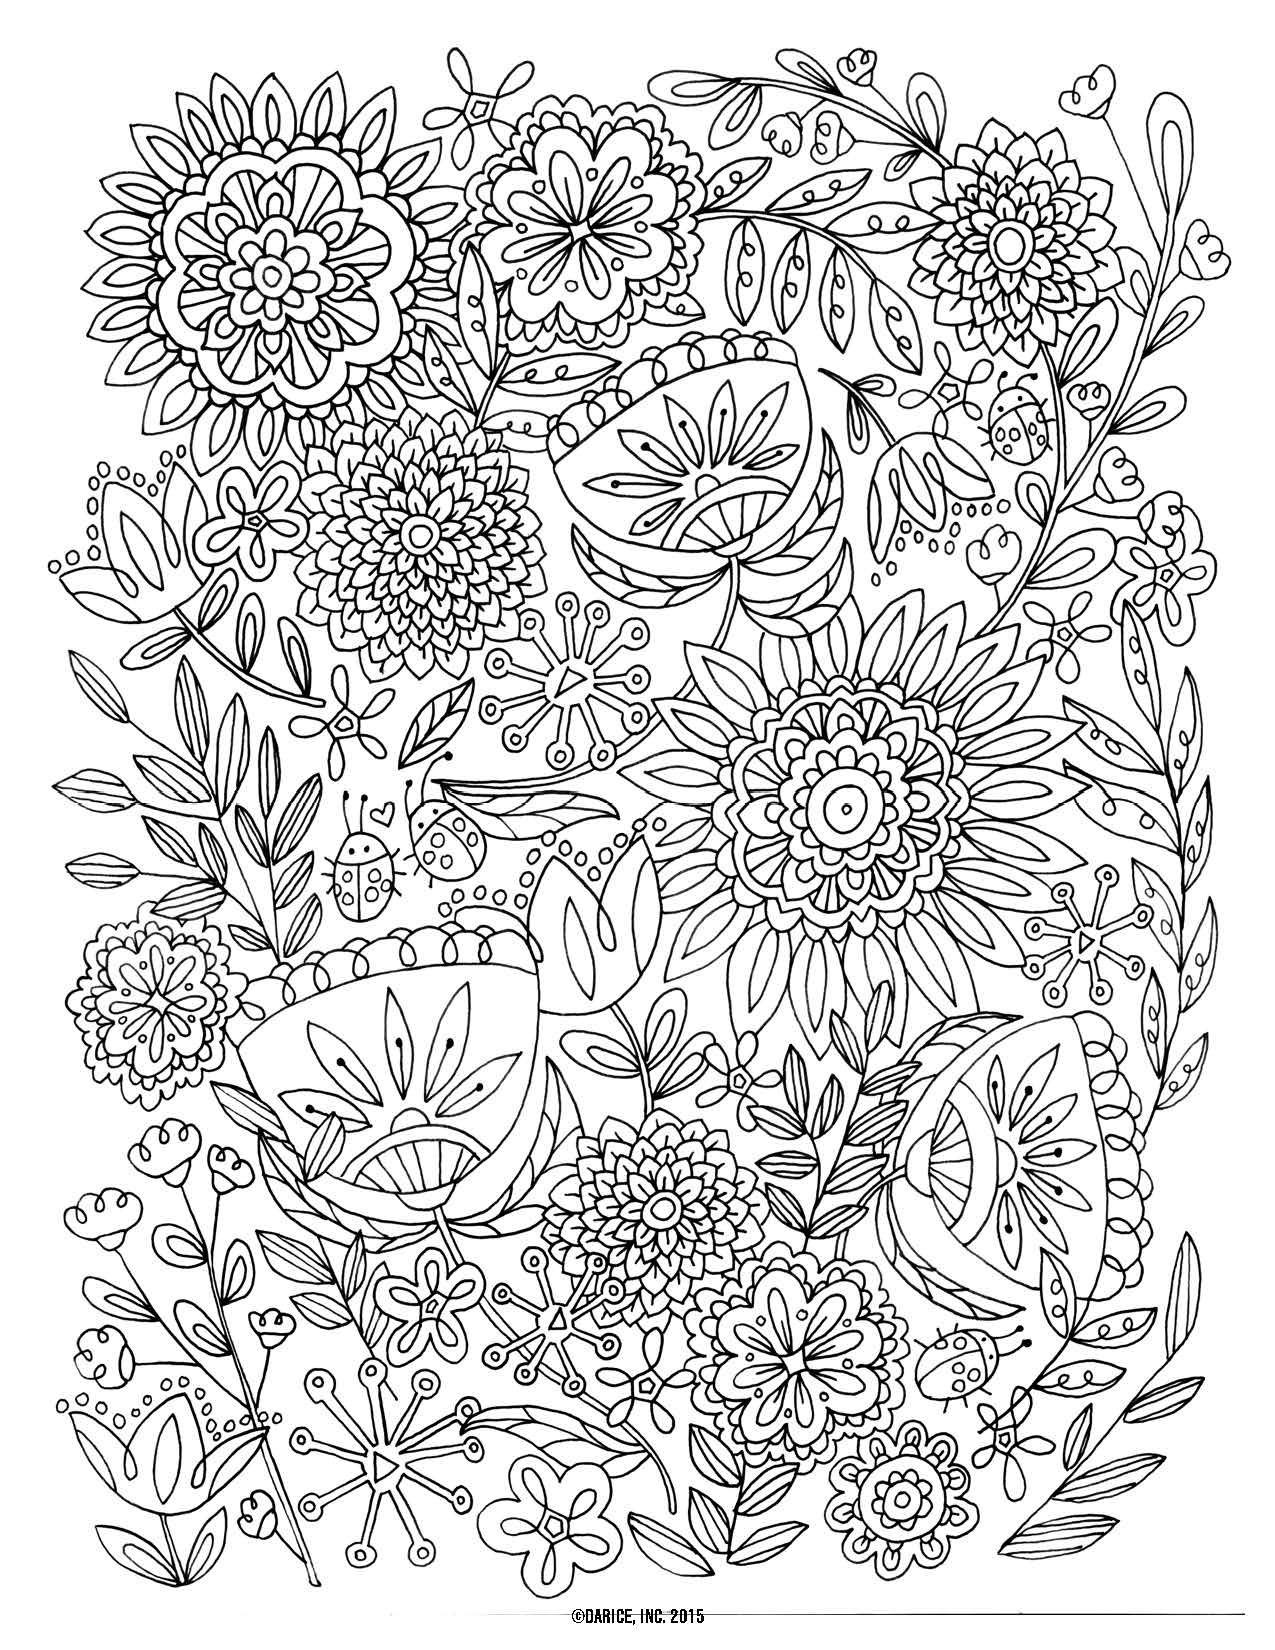 30 Popular Vase Floral Designs 2024 free download vase floral designs of cool vases flower vase coloring page pages flowers in a top i 0d ruva inside cool vases flower vase coloring page pages flowers in a top i 0d